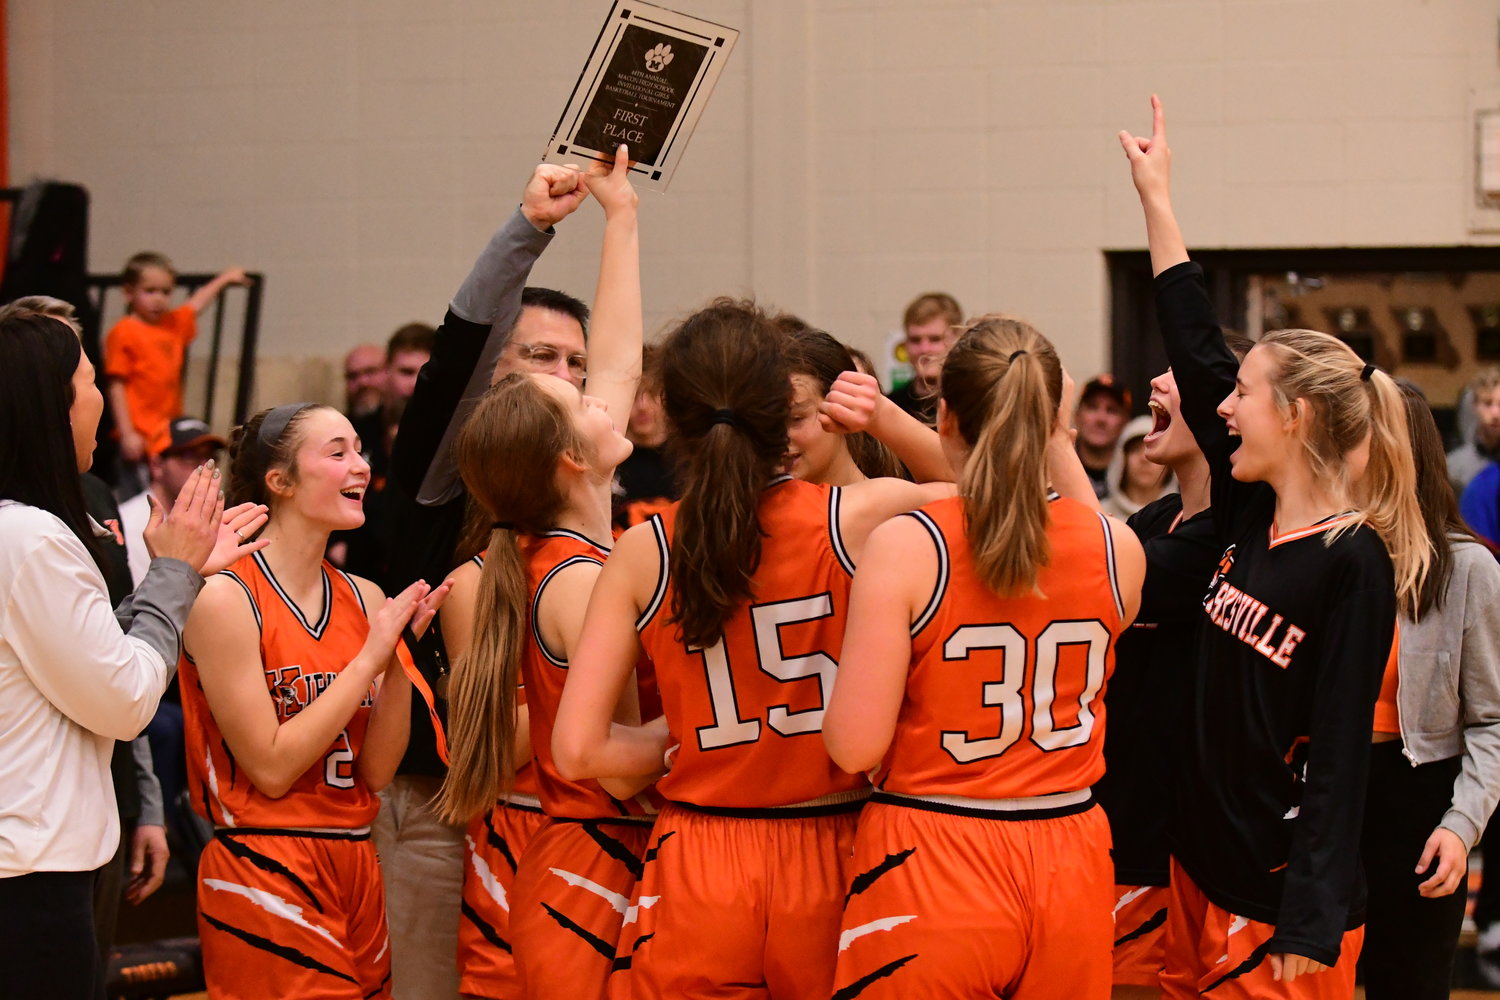 The Kirksville girls basketball team celebrates with its trophy after winning the 44th annual Macon Invitational Tournament.